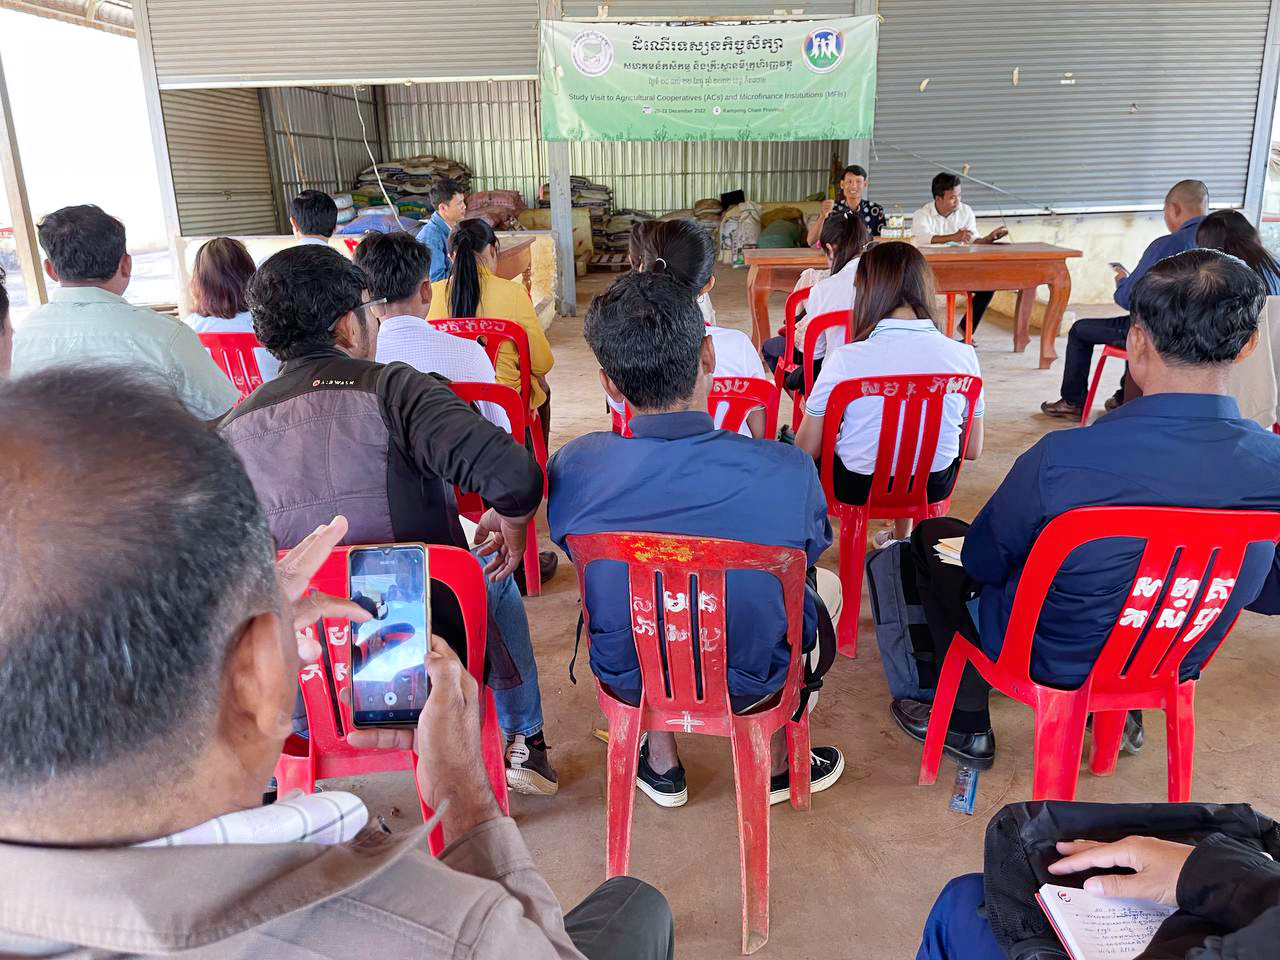 Study Tour to Agricultural Cooperatives and Microfinance Institutions’ Branches in Kampong Cham Province